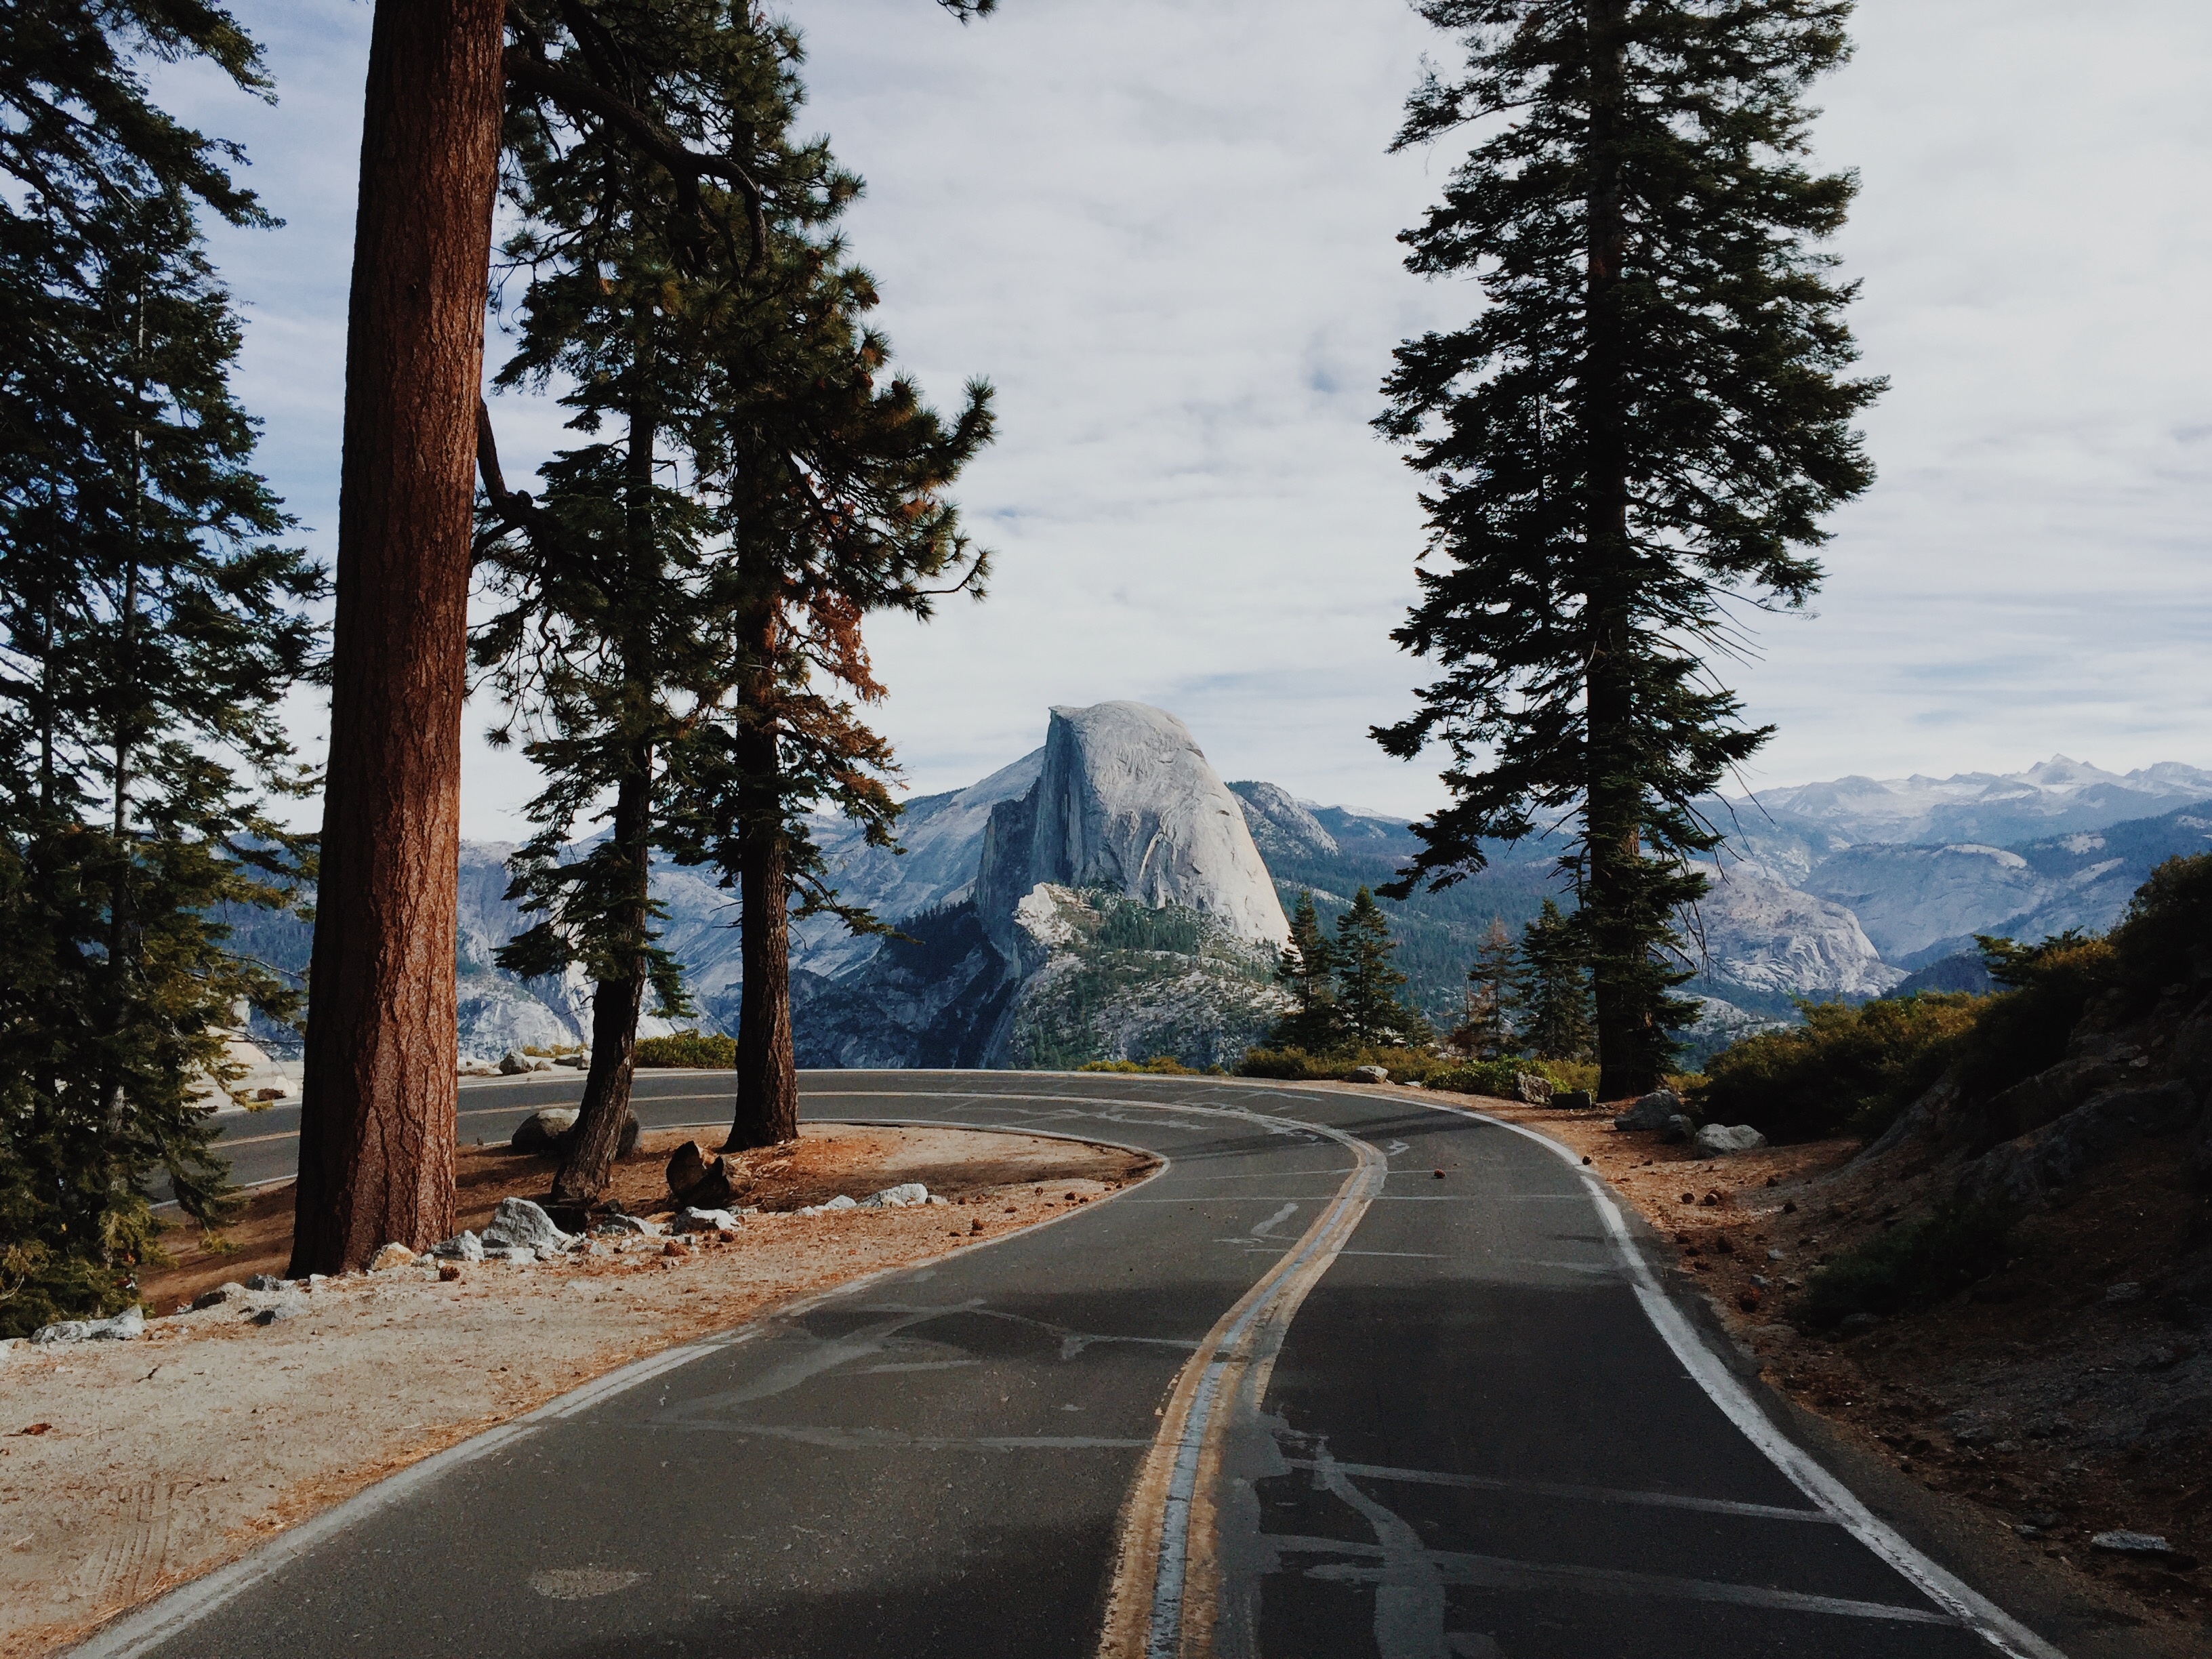 I'd take this road any day. On the way to Glacier Point, I caught this view of Half Dome you don't always get to see.